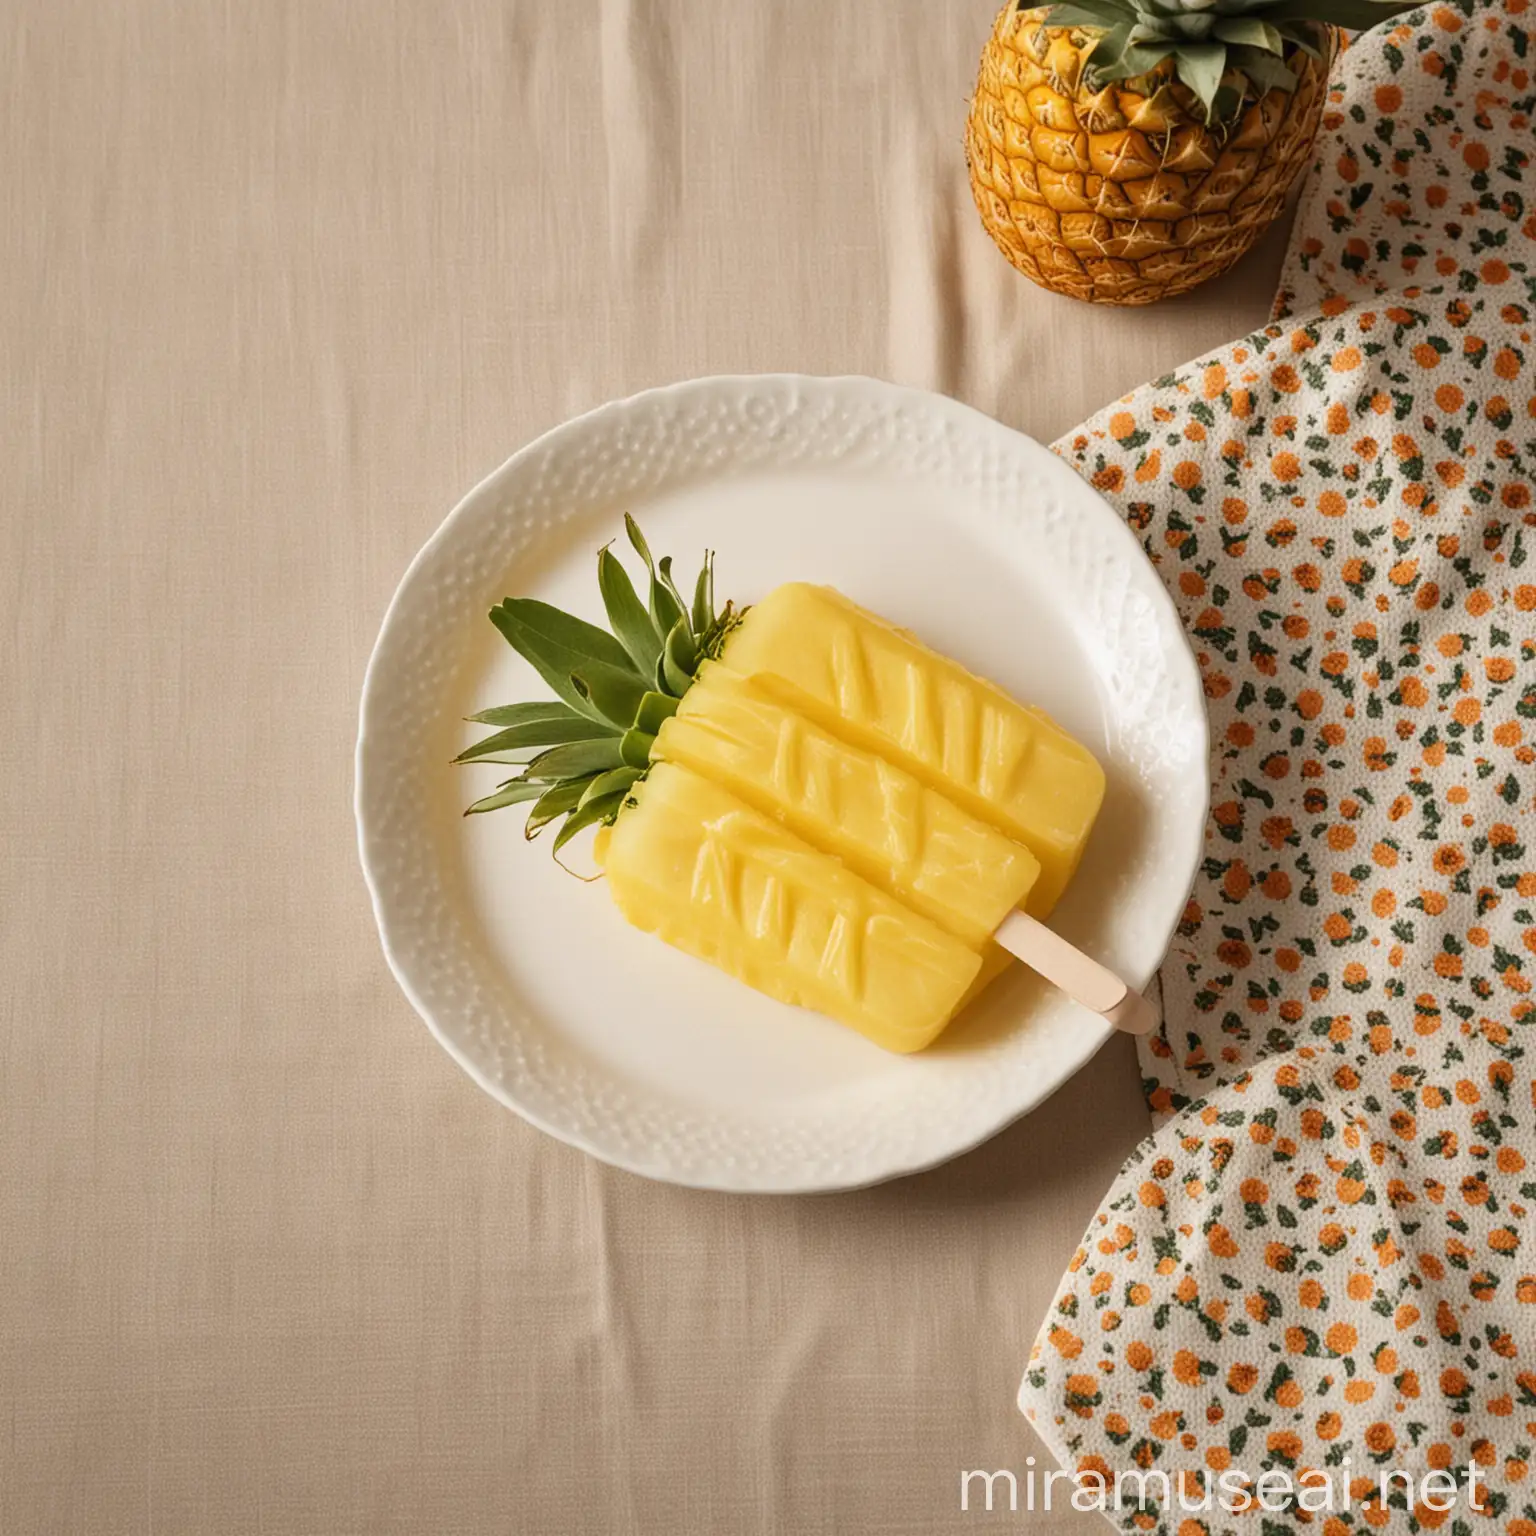 a pineapple popsicle in a plate on a table with a nice tablecloth